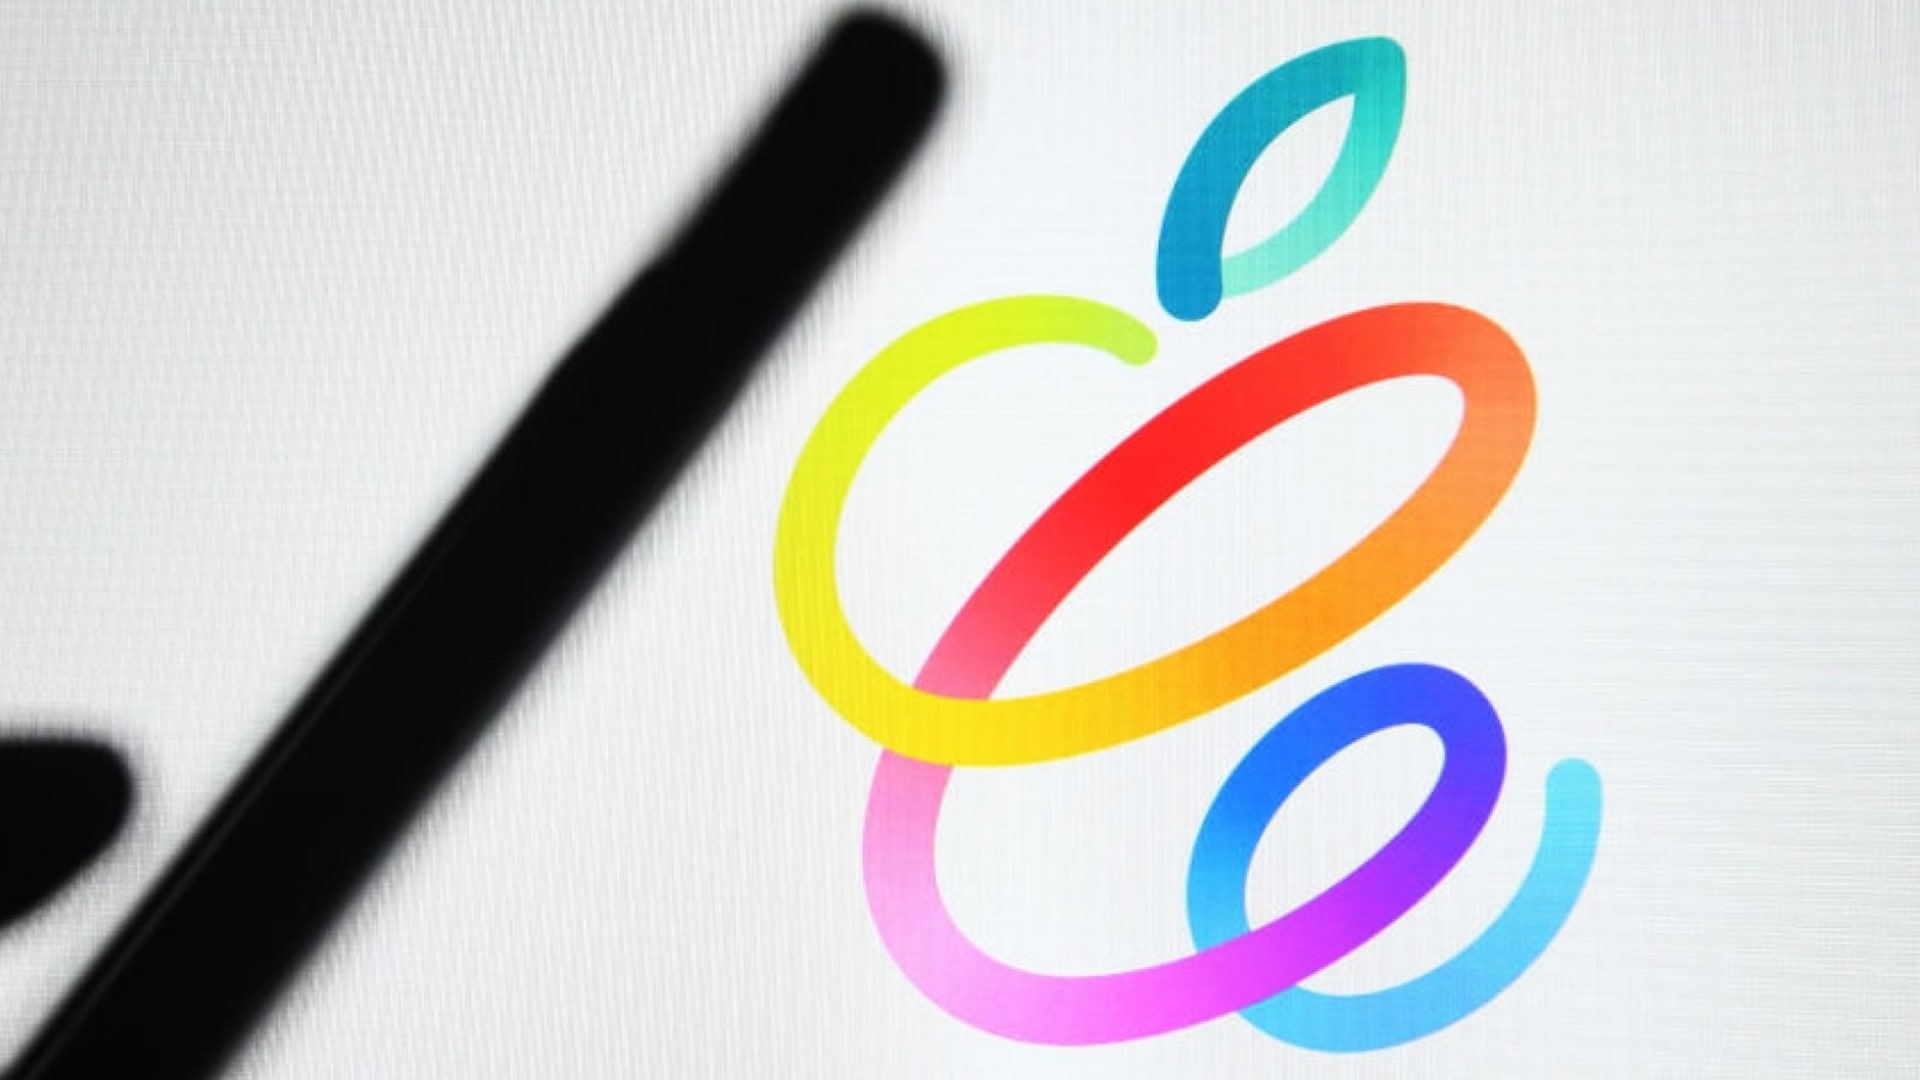 The 5 Things You Should Know About From Apple's Spring Loaded Event